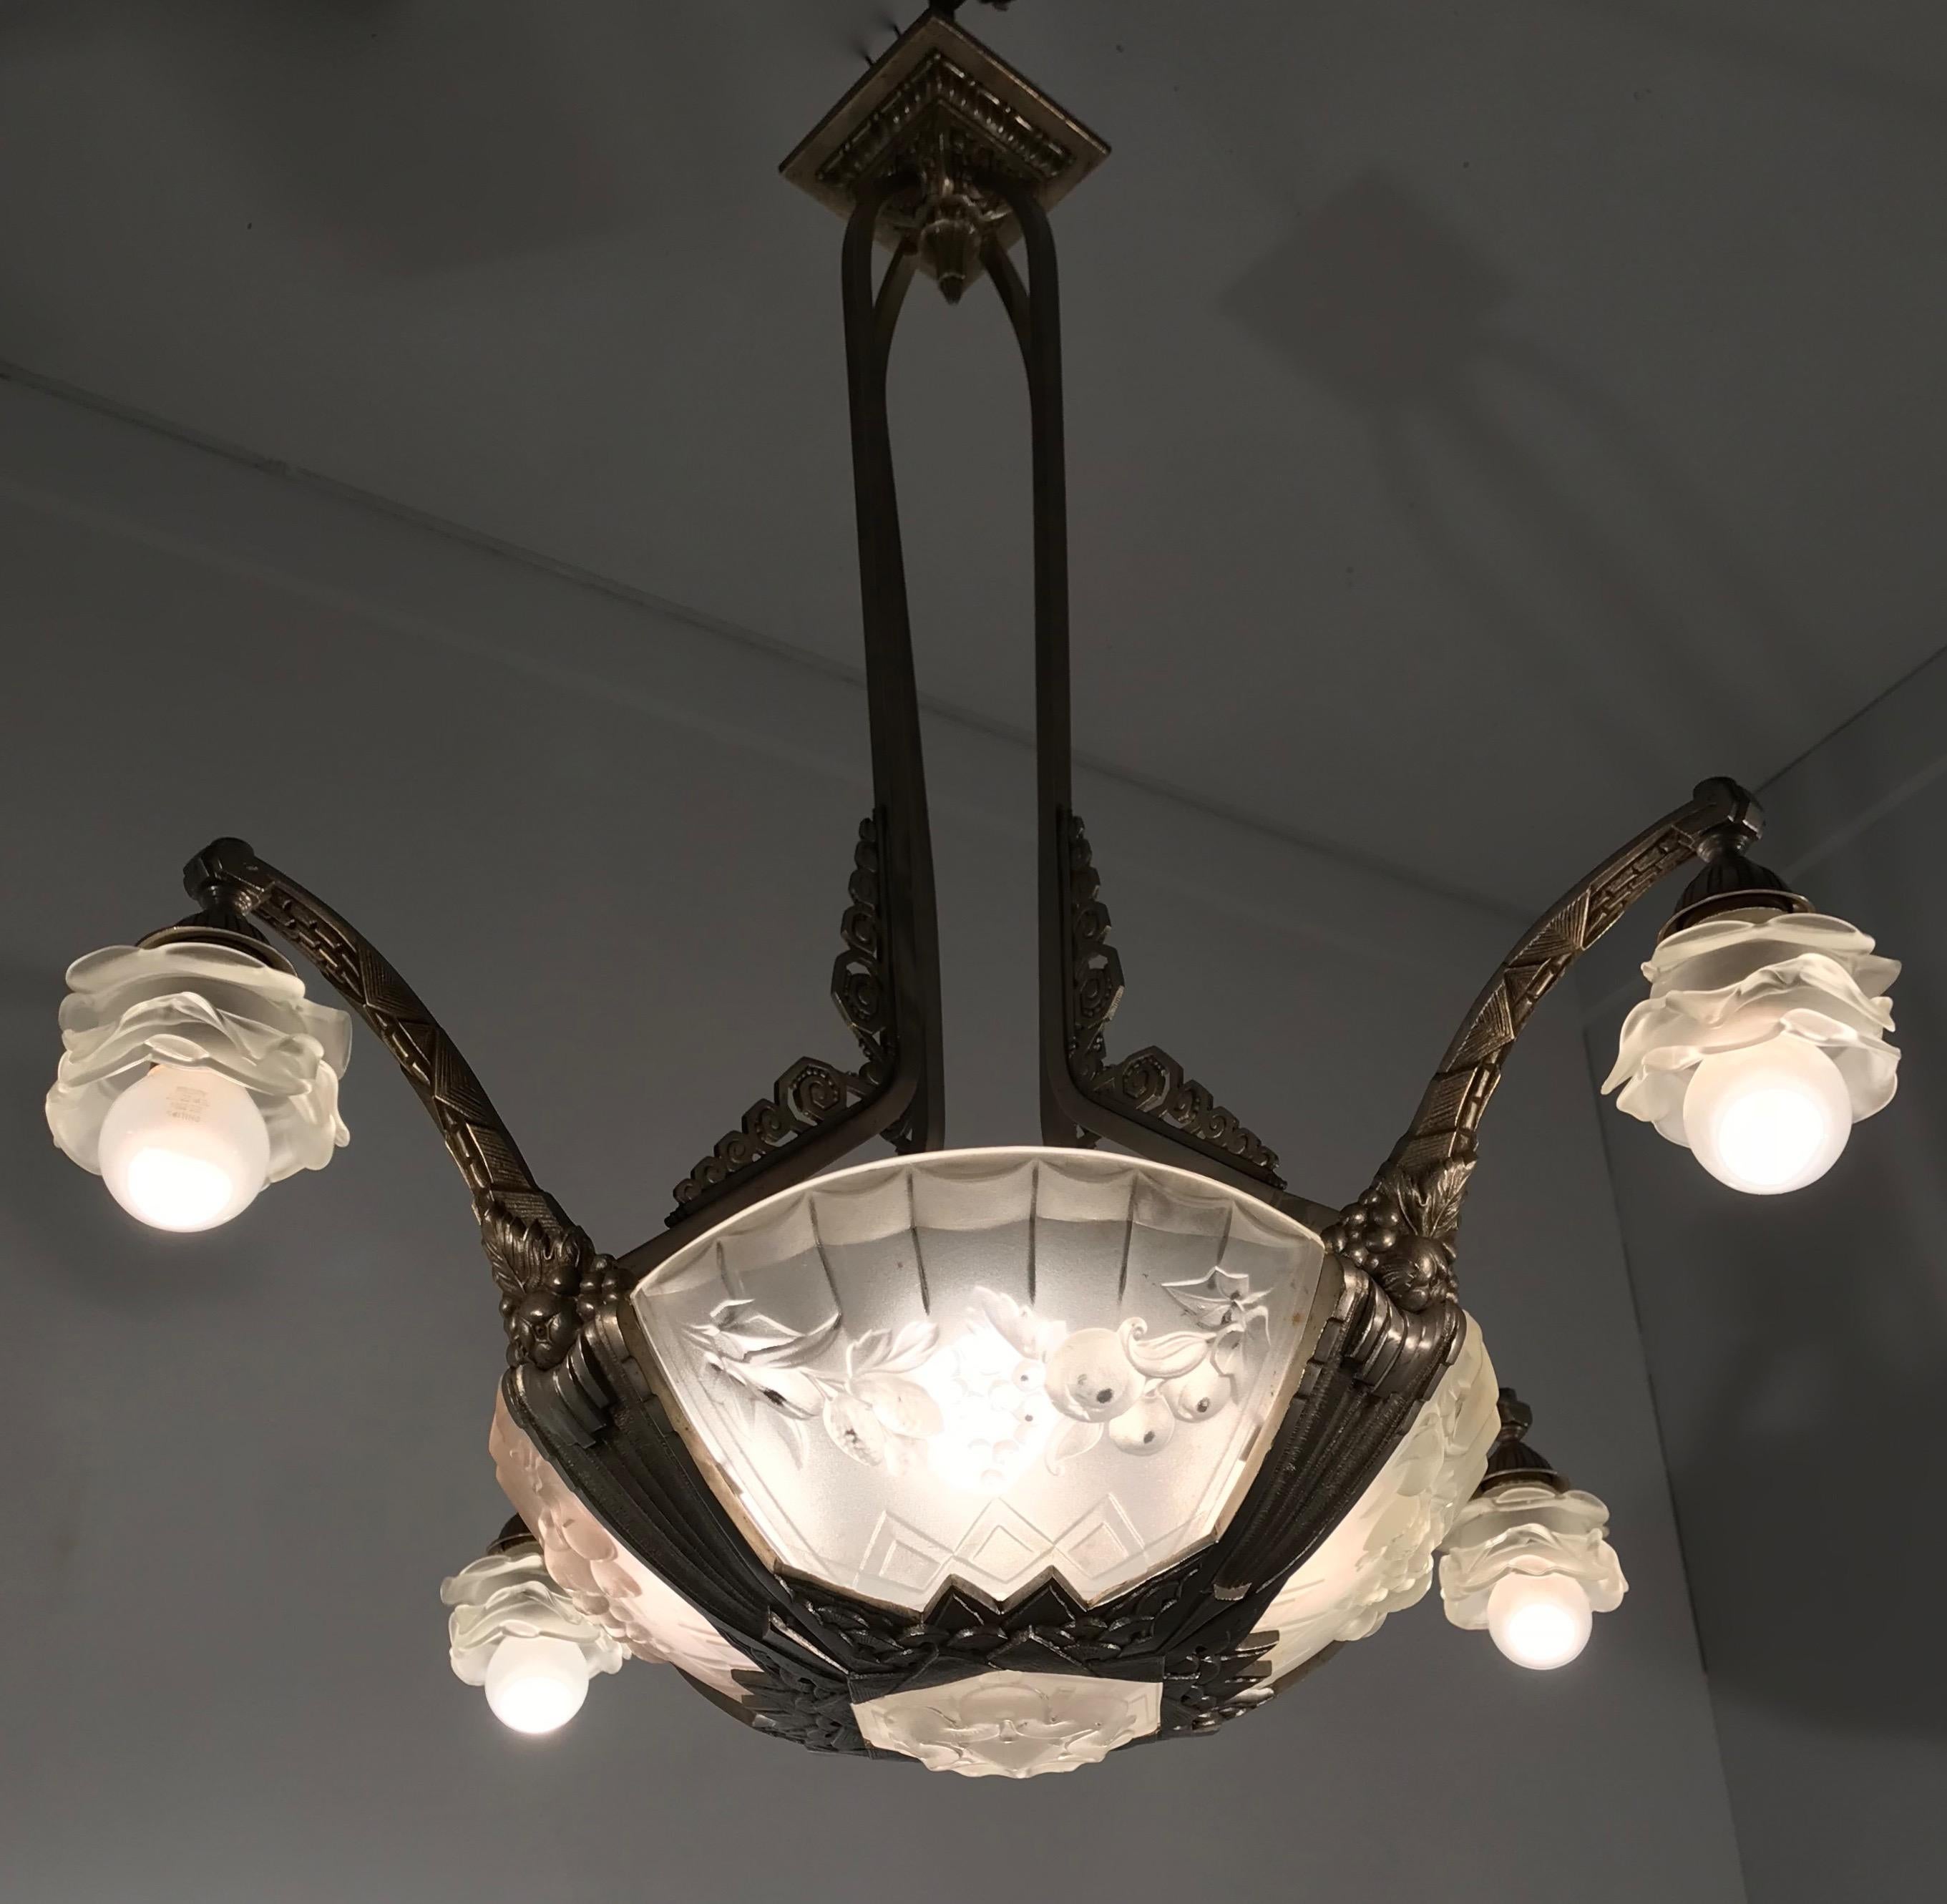 Top quality and practical size Art Deco eight-light pendant.

This highly stylish Art Deco light fixture was handcrafted in France in the 1930s. The nickel plated bronze actually makes it look like it is made of silver. This silver look makes the